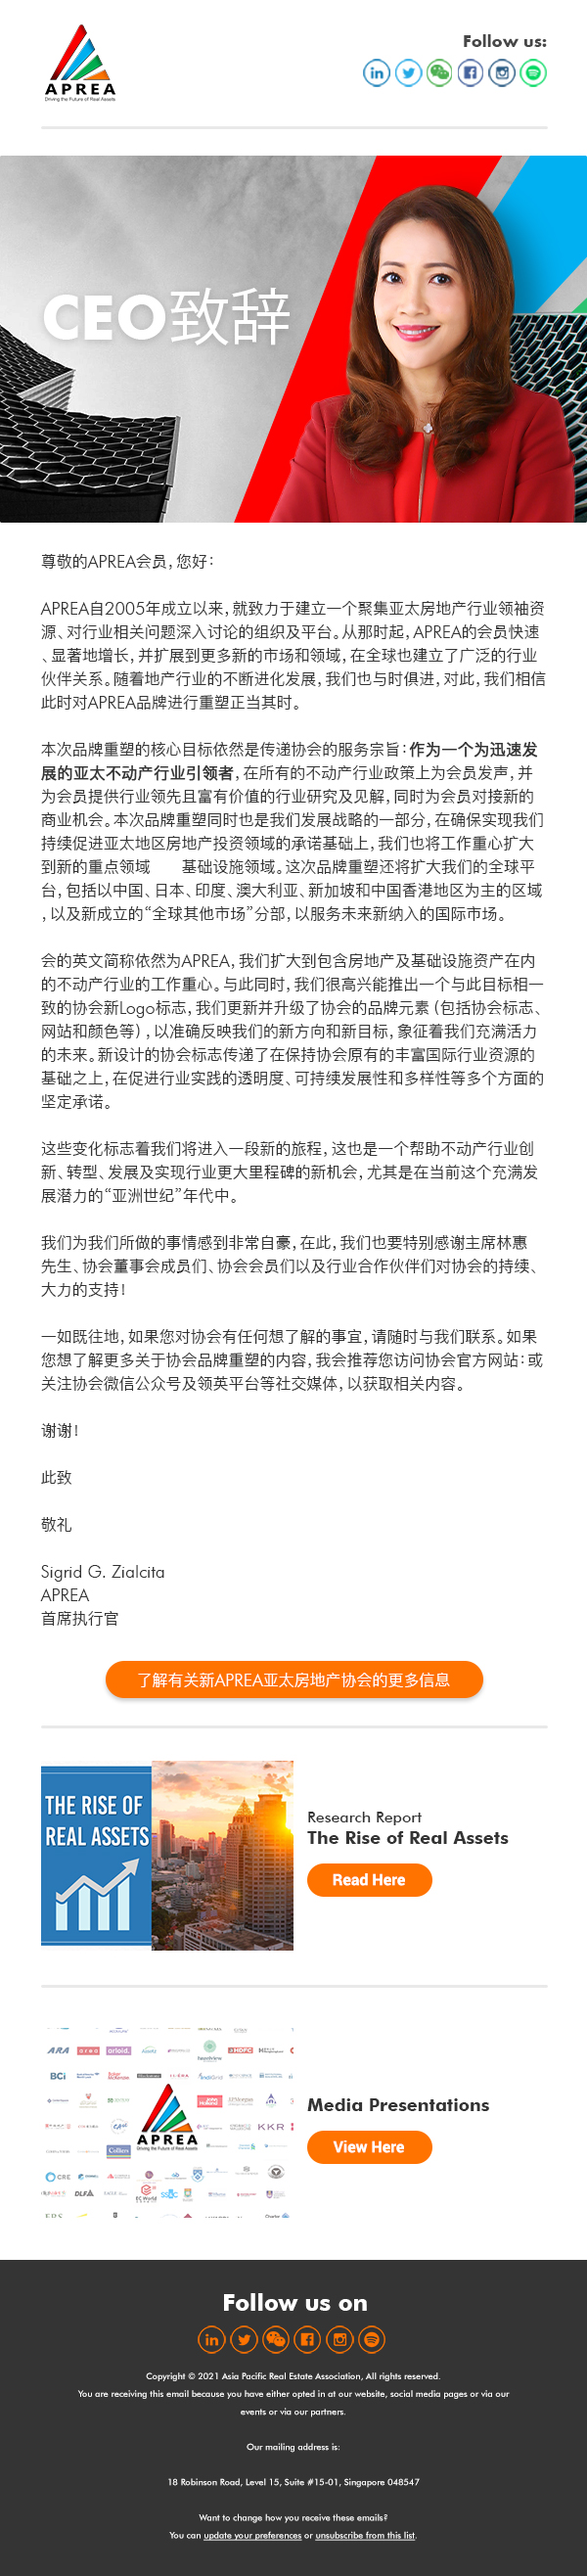 APREA Emailer April 6 chinese